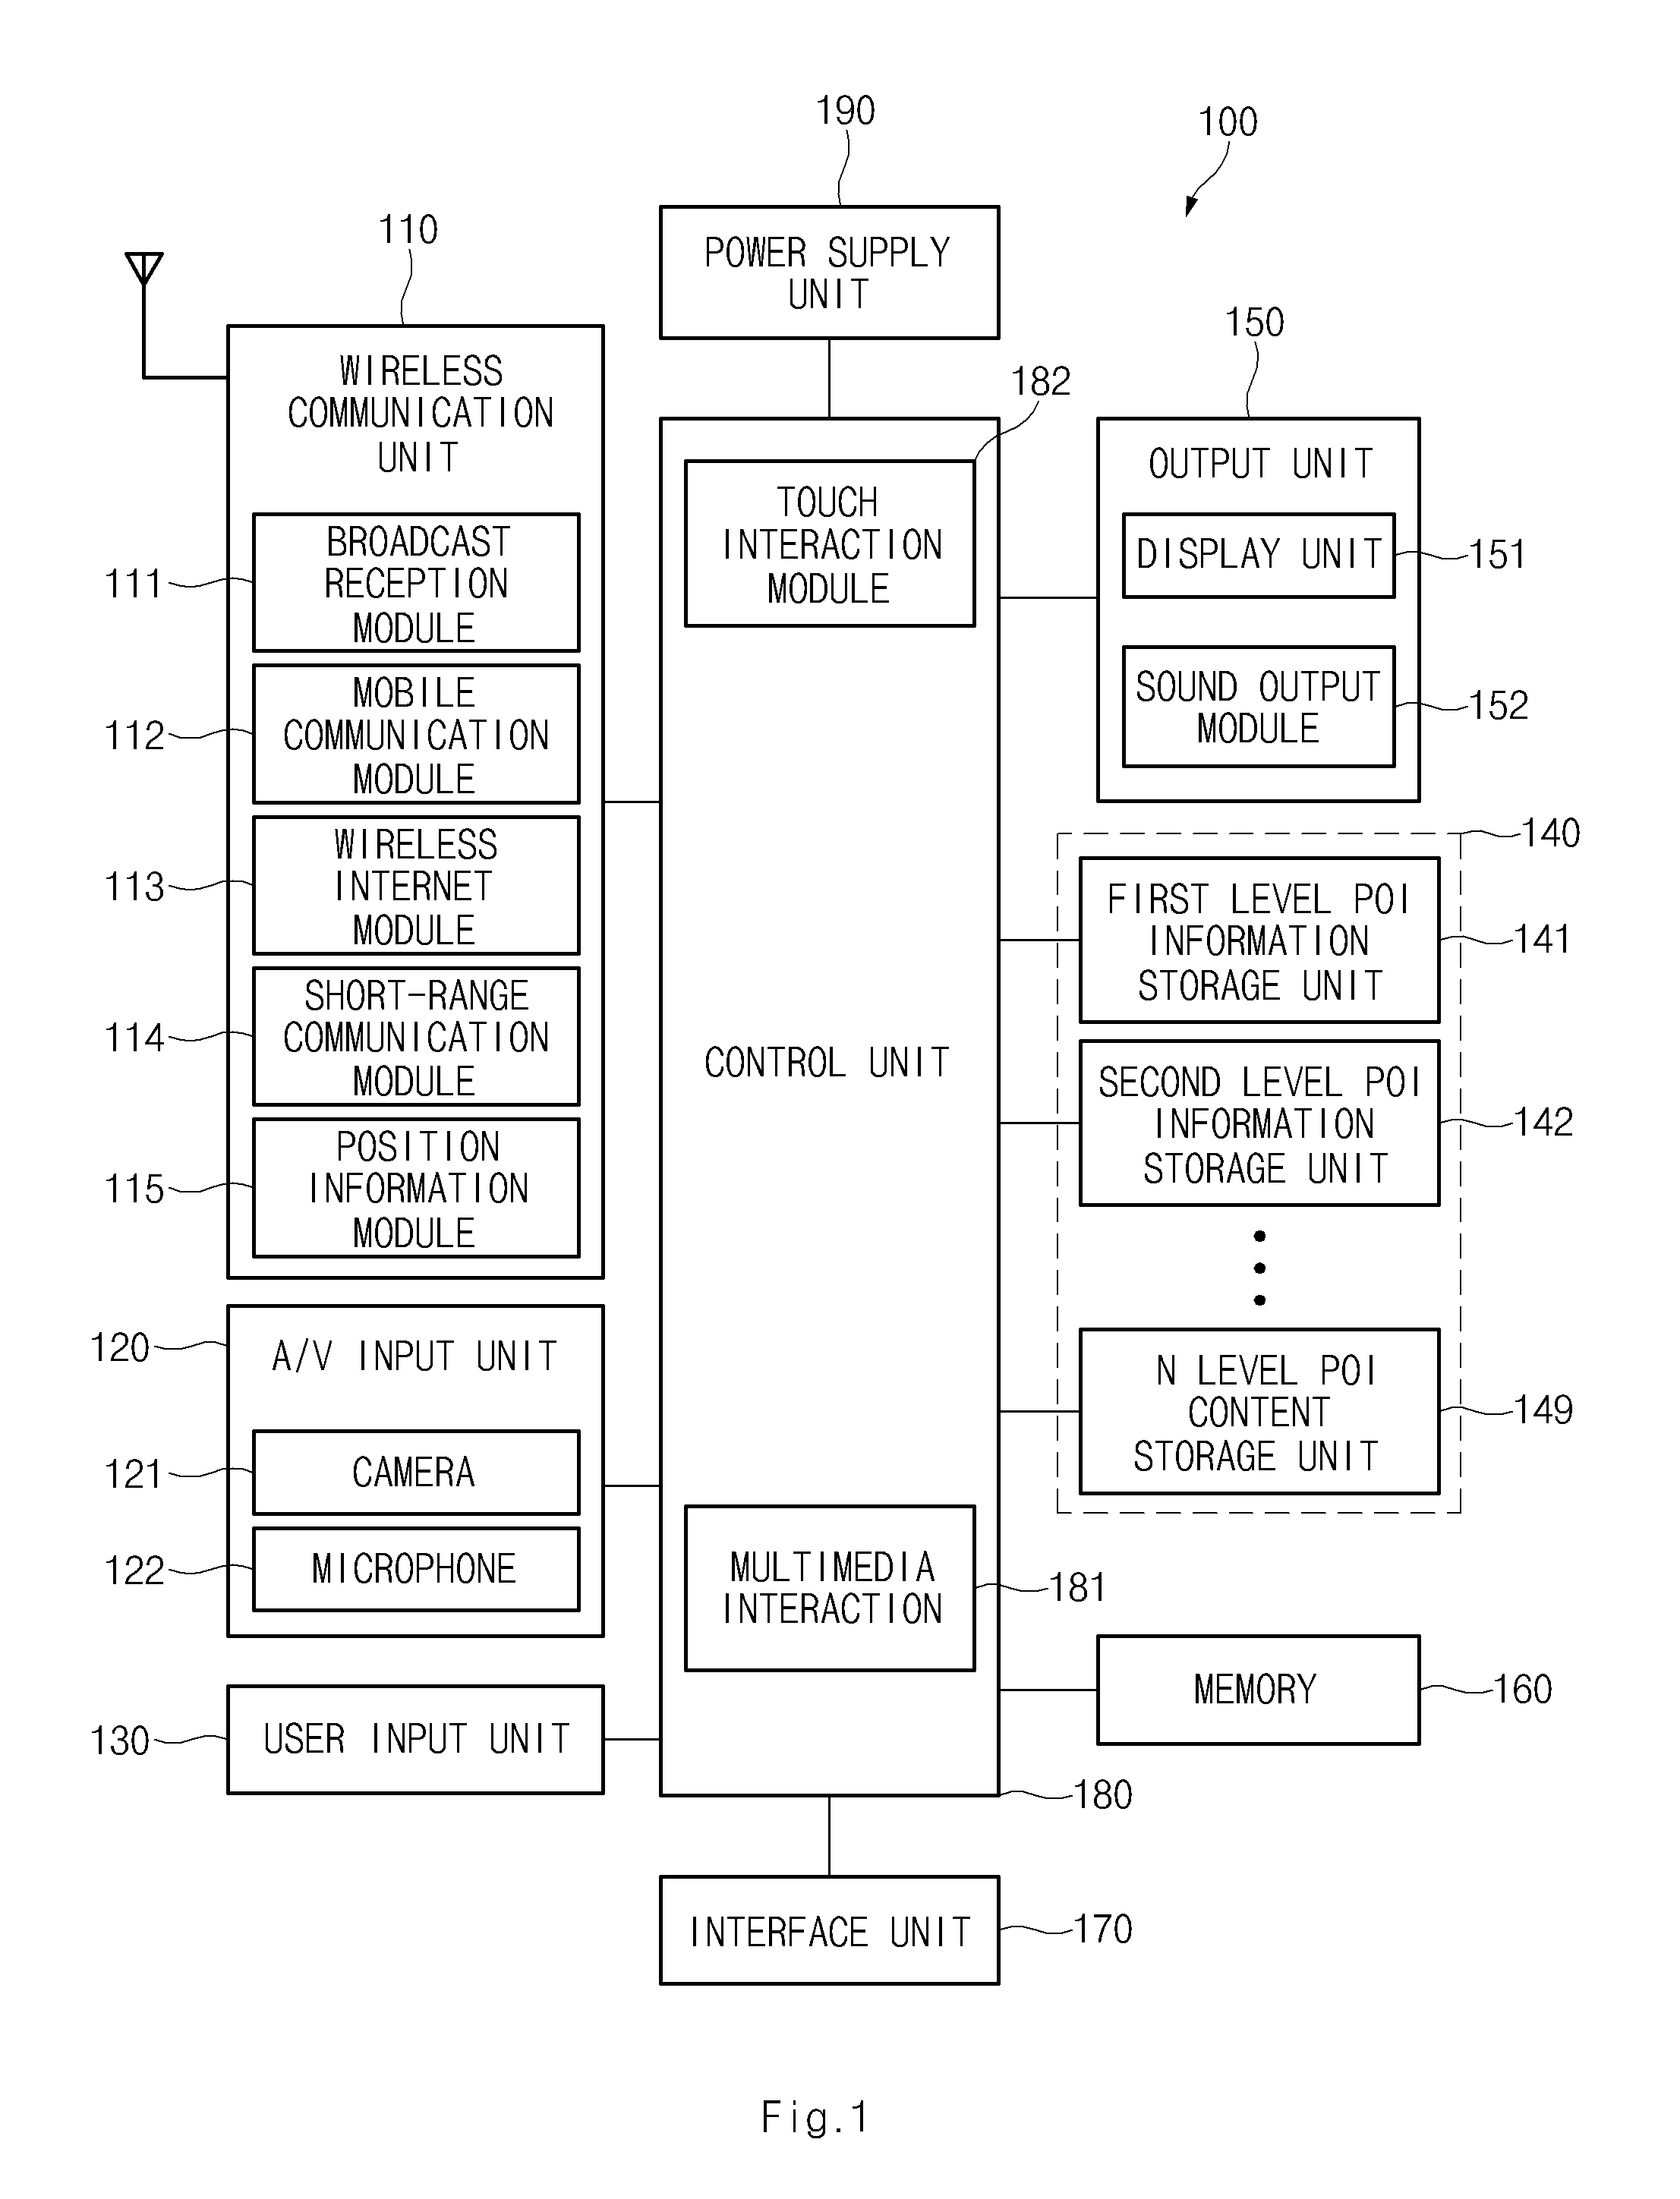 Method and apparatus for controlling detailed information display for selected area using dynamic touch interaction